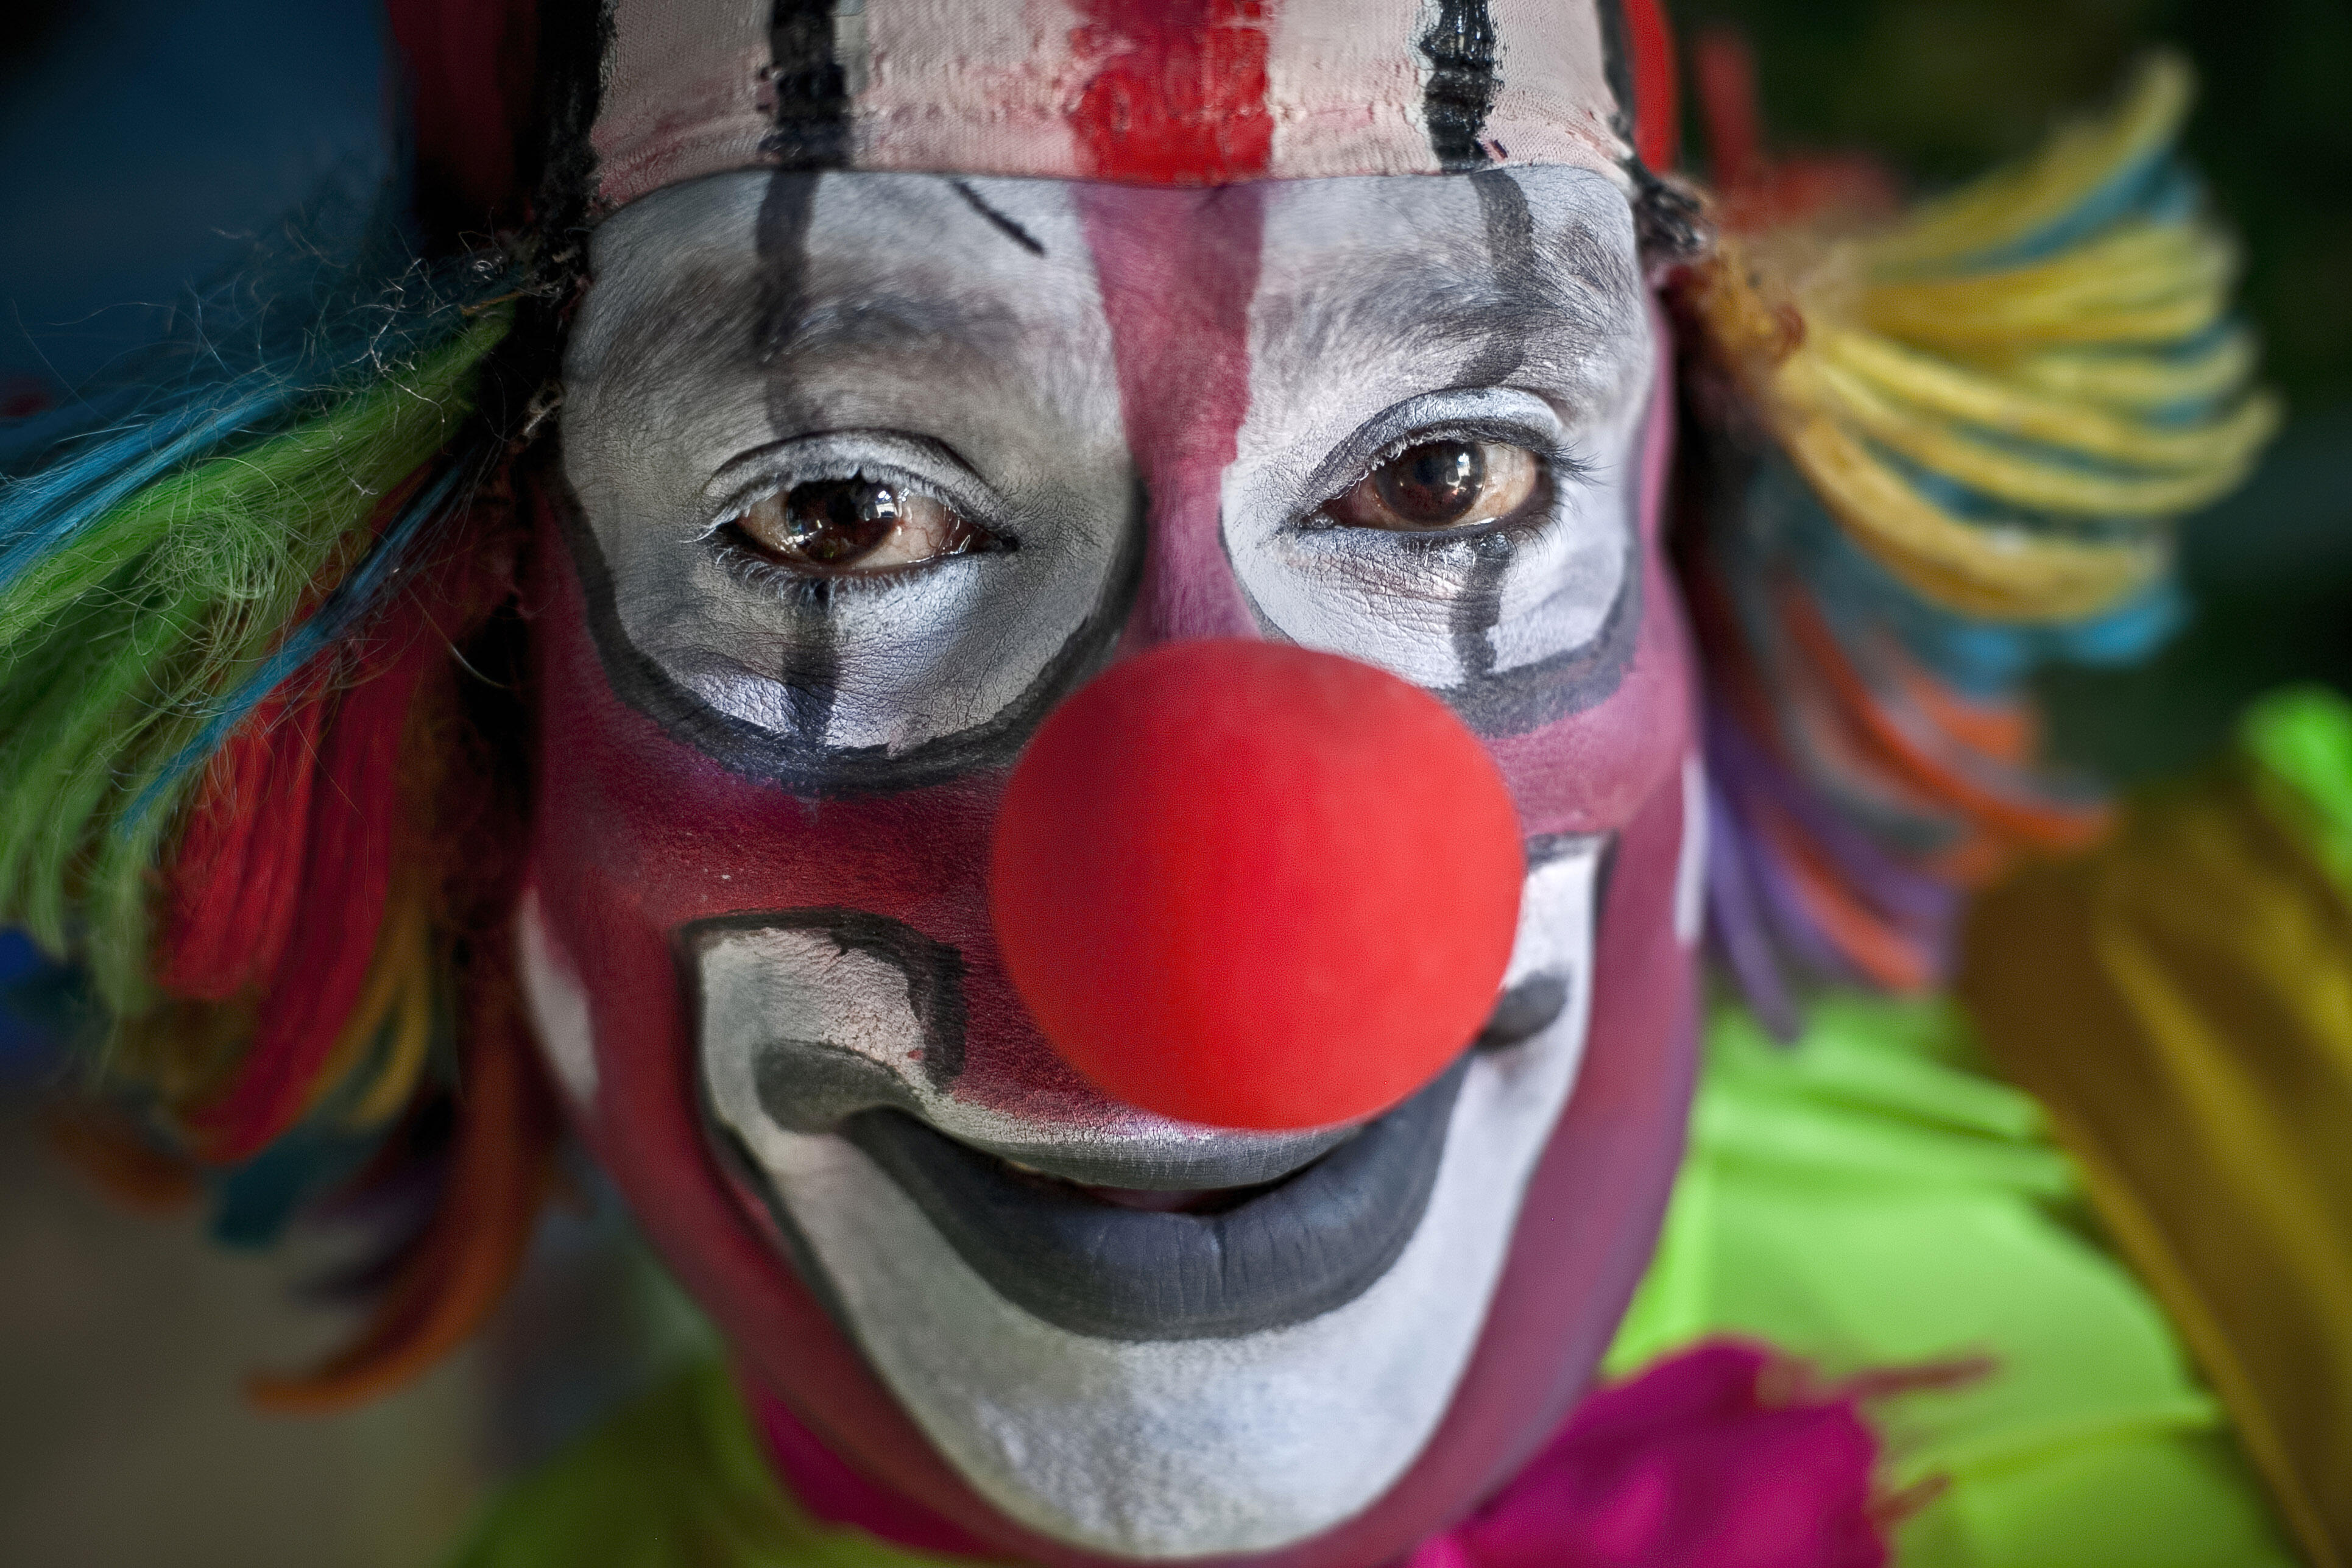 PIMPRI, INDIA - OCTOBER 17: Biju poses for a photograph before a performance on October 17, 2015 at the Rambo Circus in Pimpri, India. The Rambo Circus travels throughout India and hosts visiting circus artists from Ethiopia, Nepal, Russia, among other countries. A crackdown on the use of wild animals in the circus has led to a decline in the industry, but Rambo circus owner, Sujit Dilip, continues to attract customers with new acts and air conditioned tents. (Photo by Allison Joyce/Getty Images)